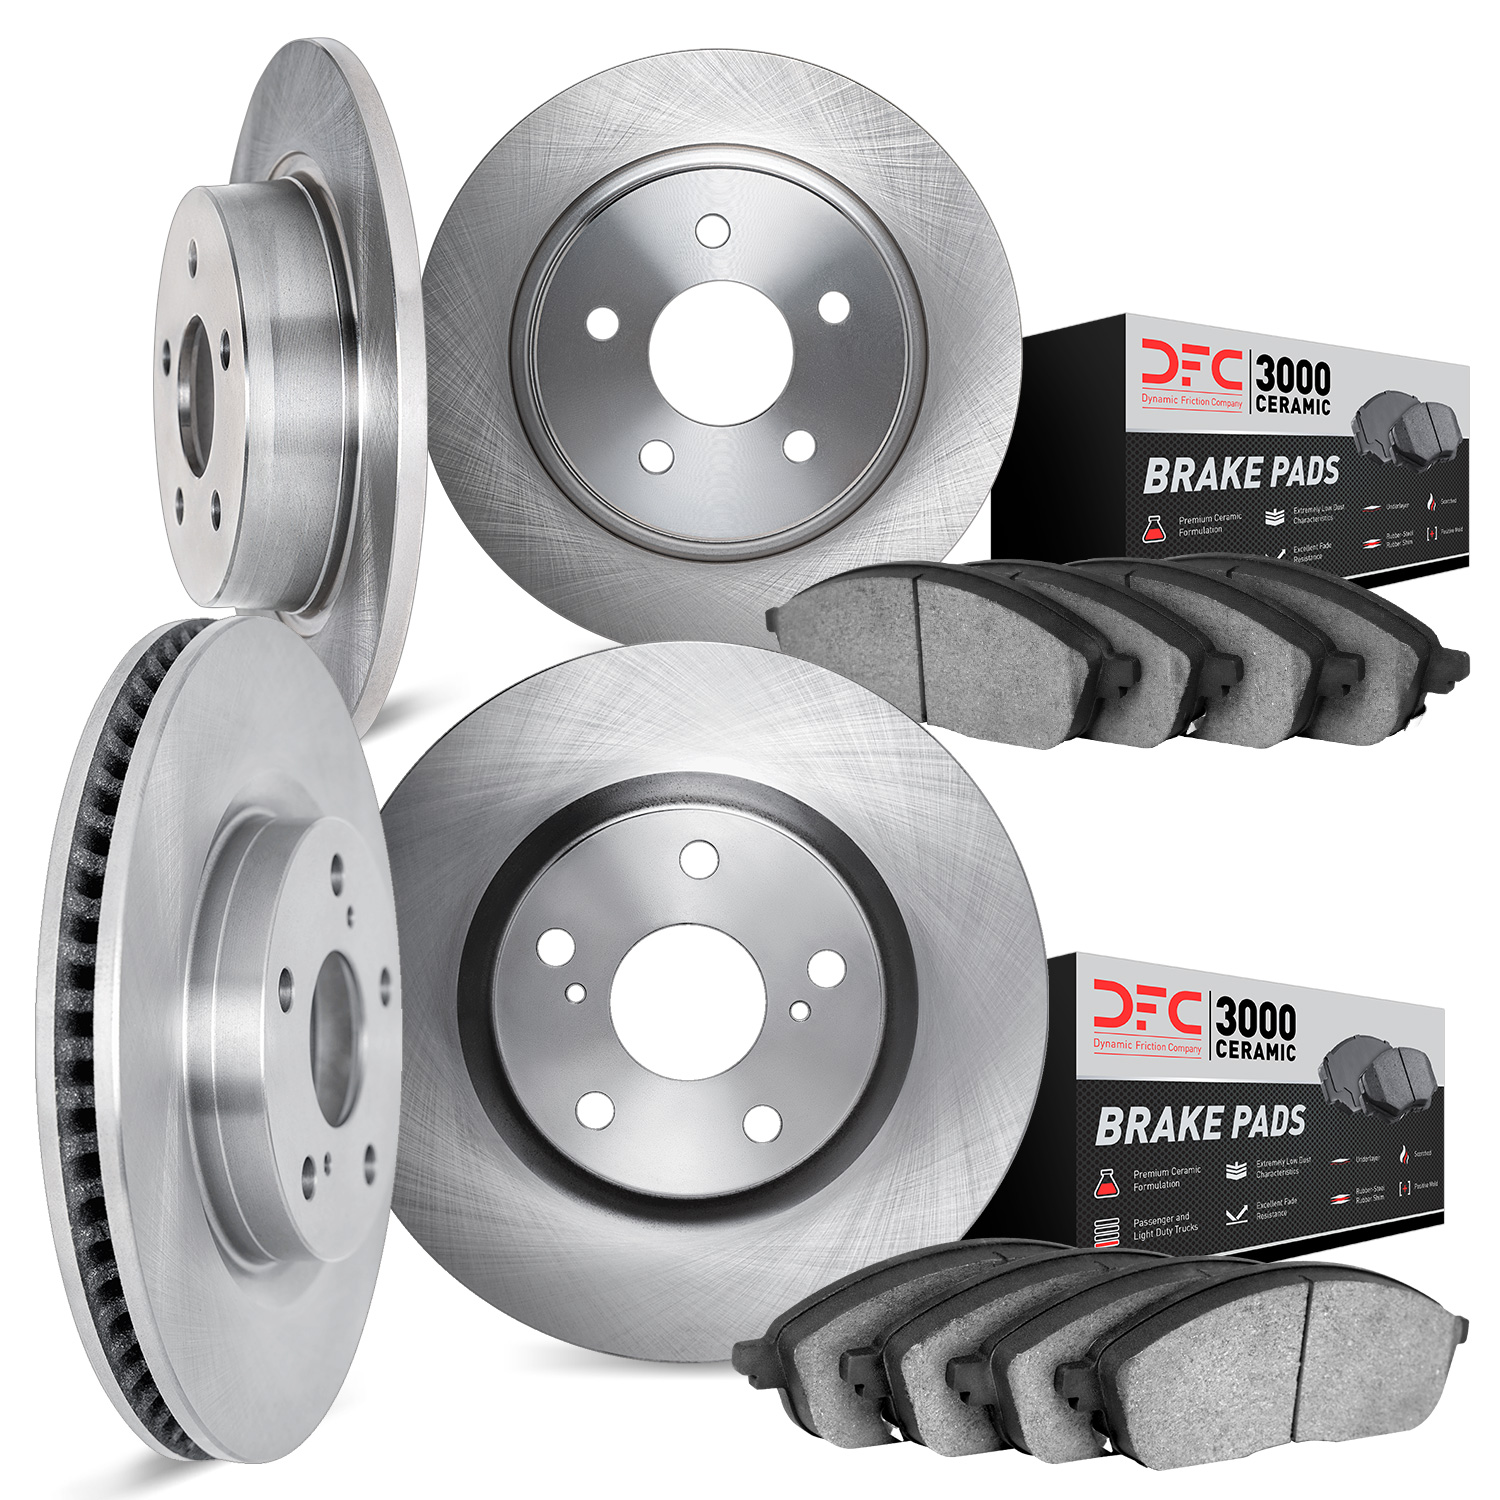 6304-76037 Brake Rotors with 3000-Series Ceramic Brake Pads Kit, 1998-1999 Lexus/Toyota/Scion, Position: Front and Rear